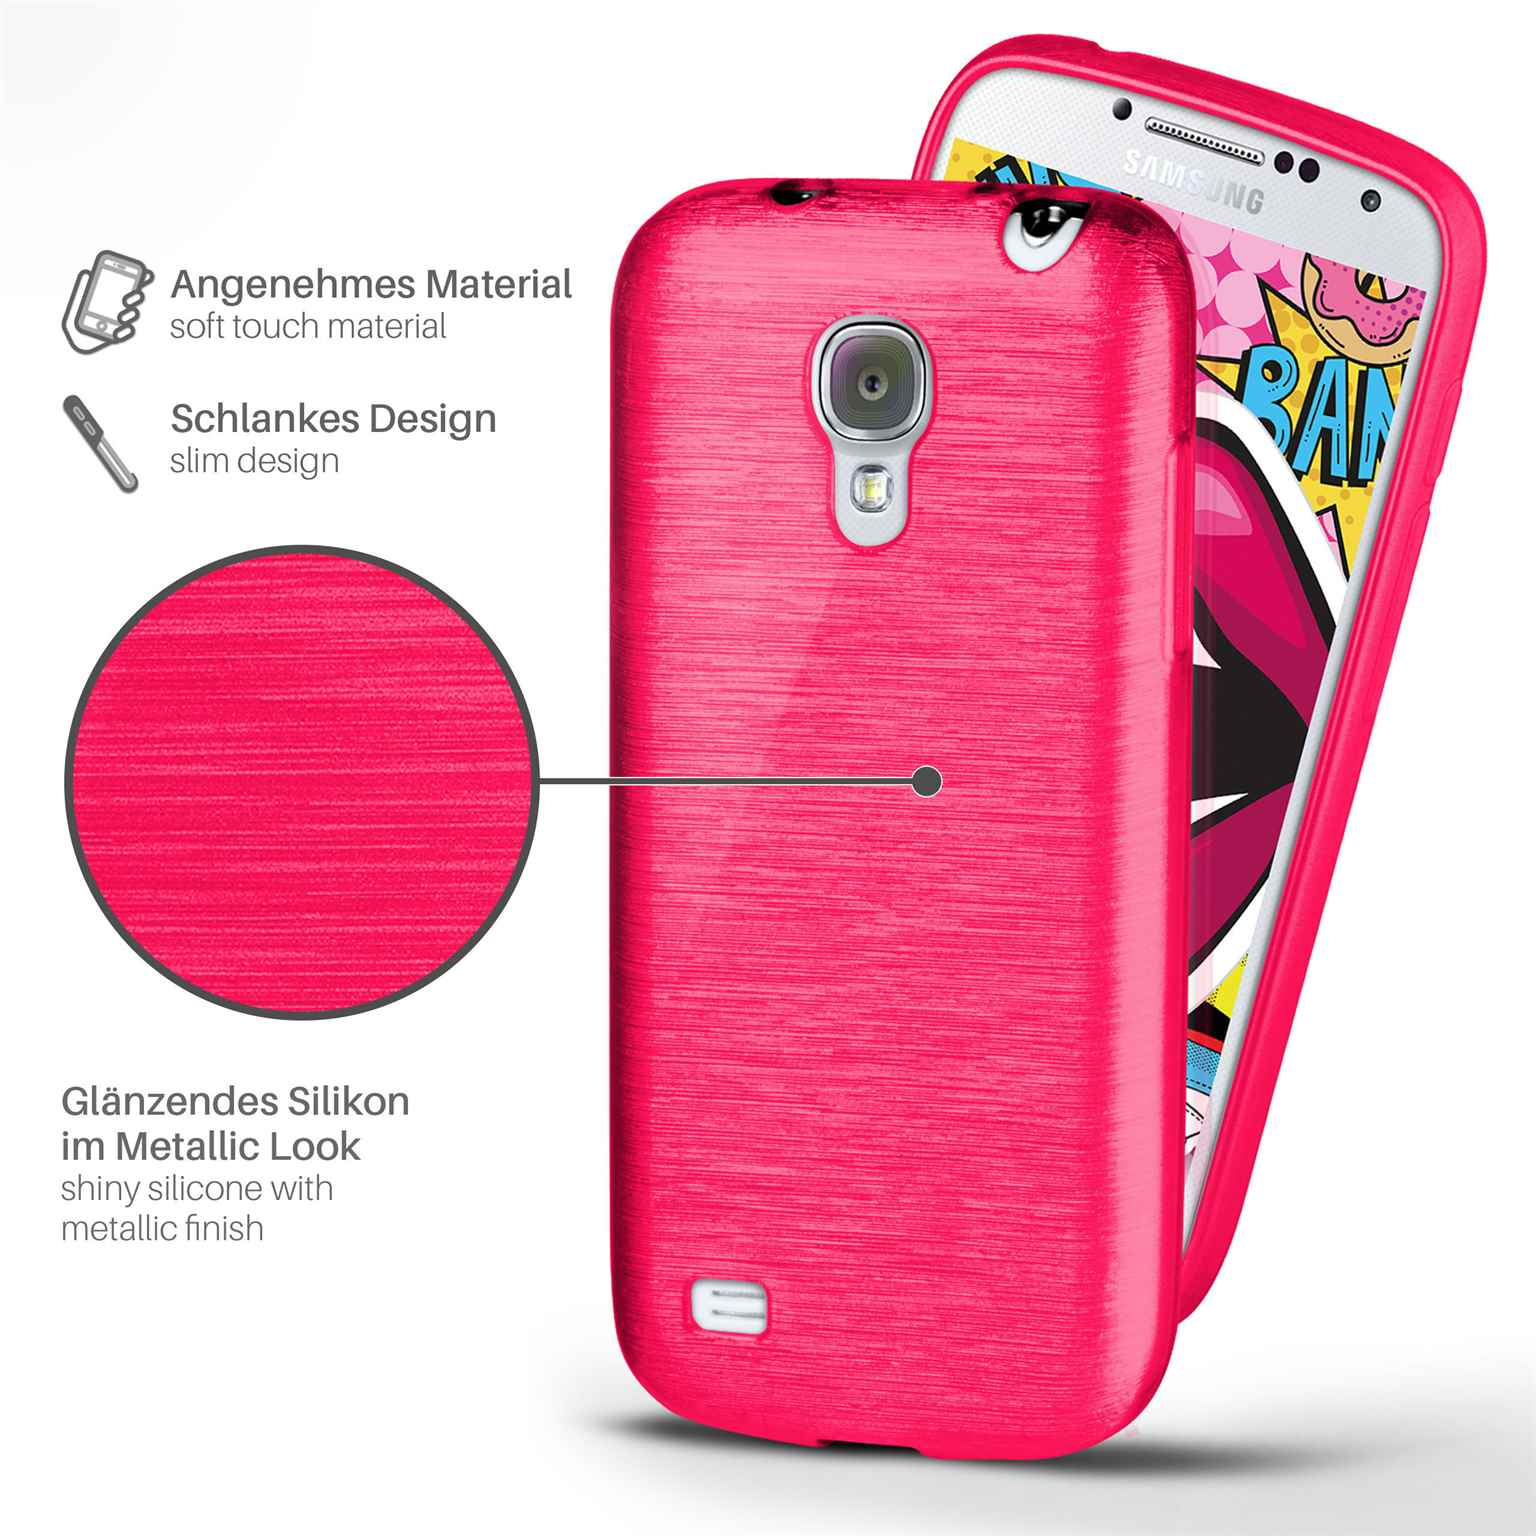 Backcover, S4, Brushed MOEX Galaxy Case, Samsung, Magenta-Pink